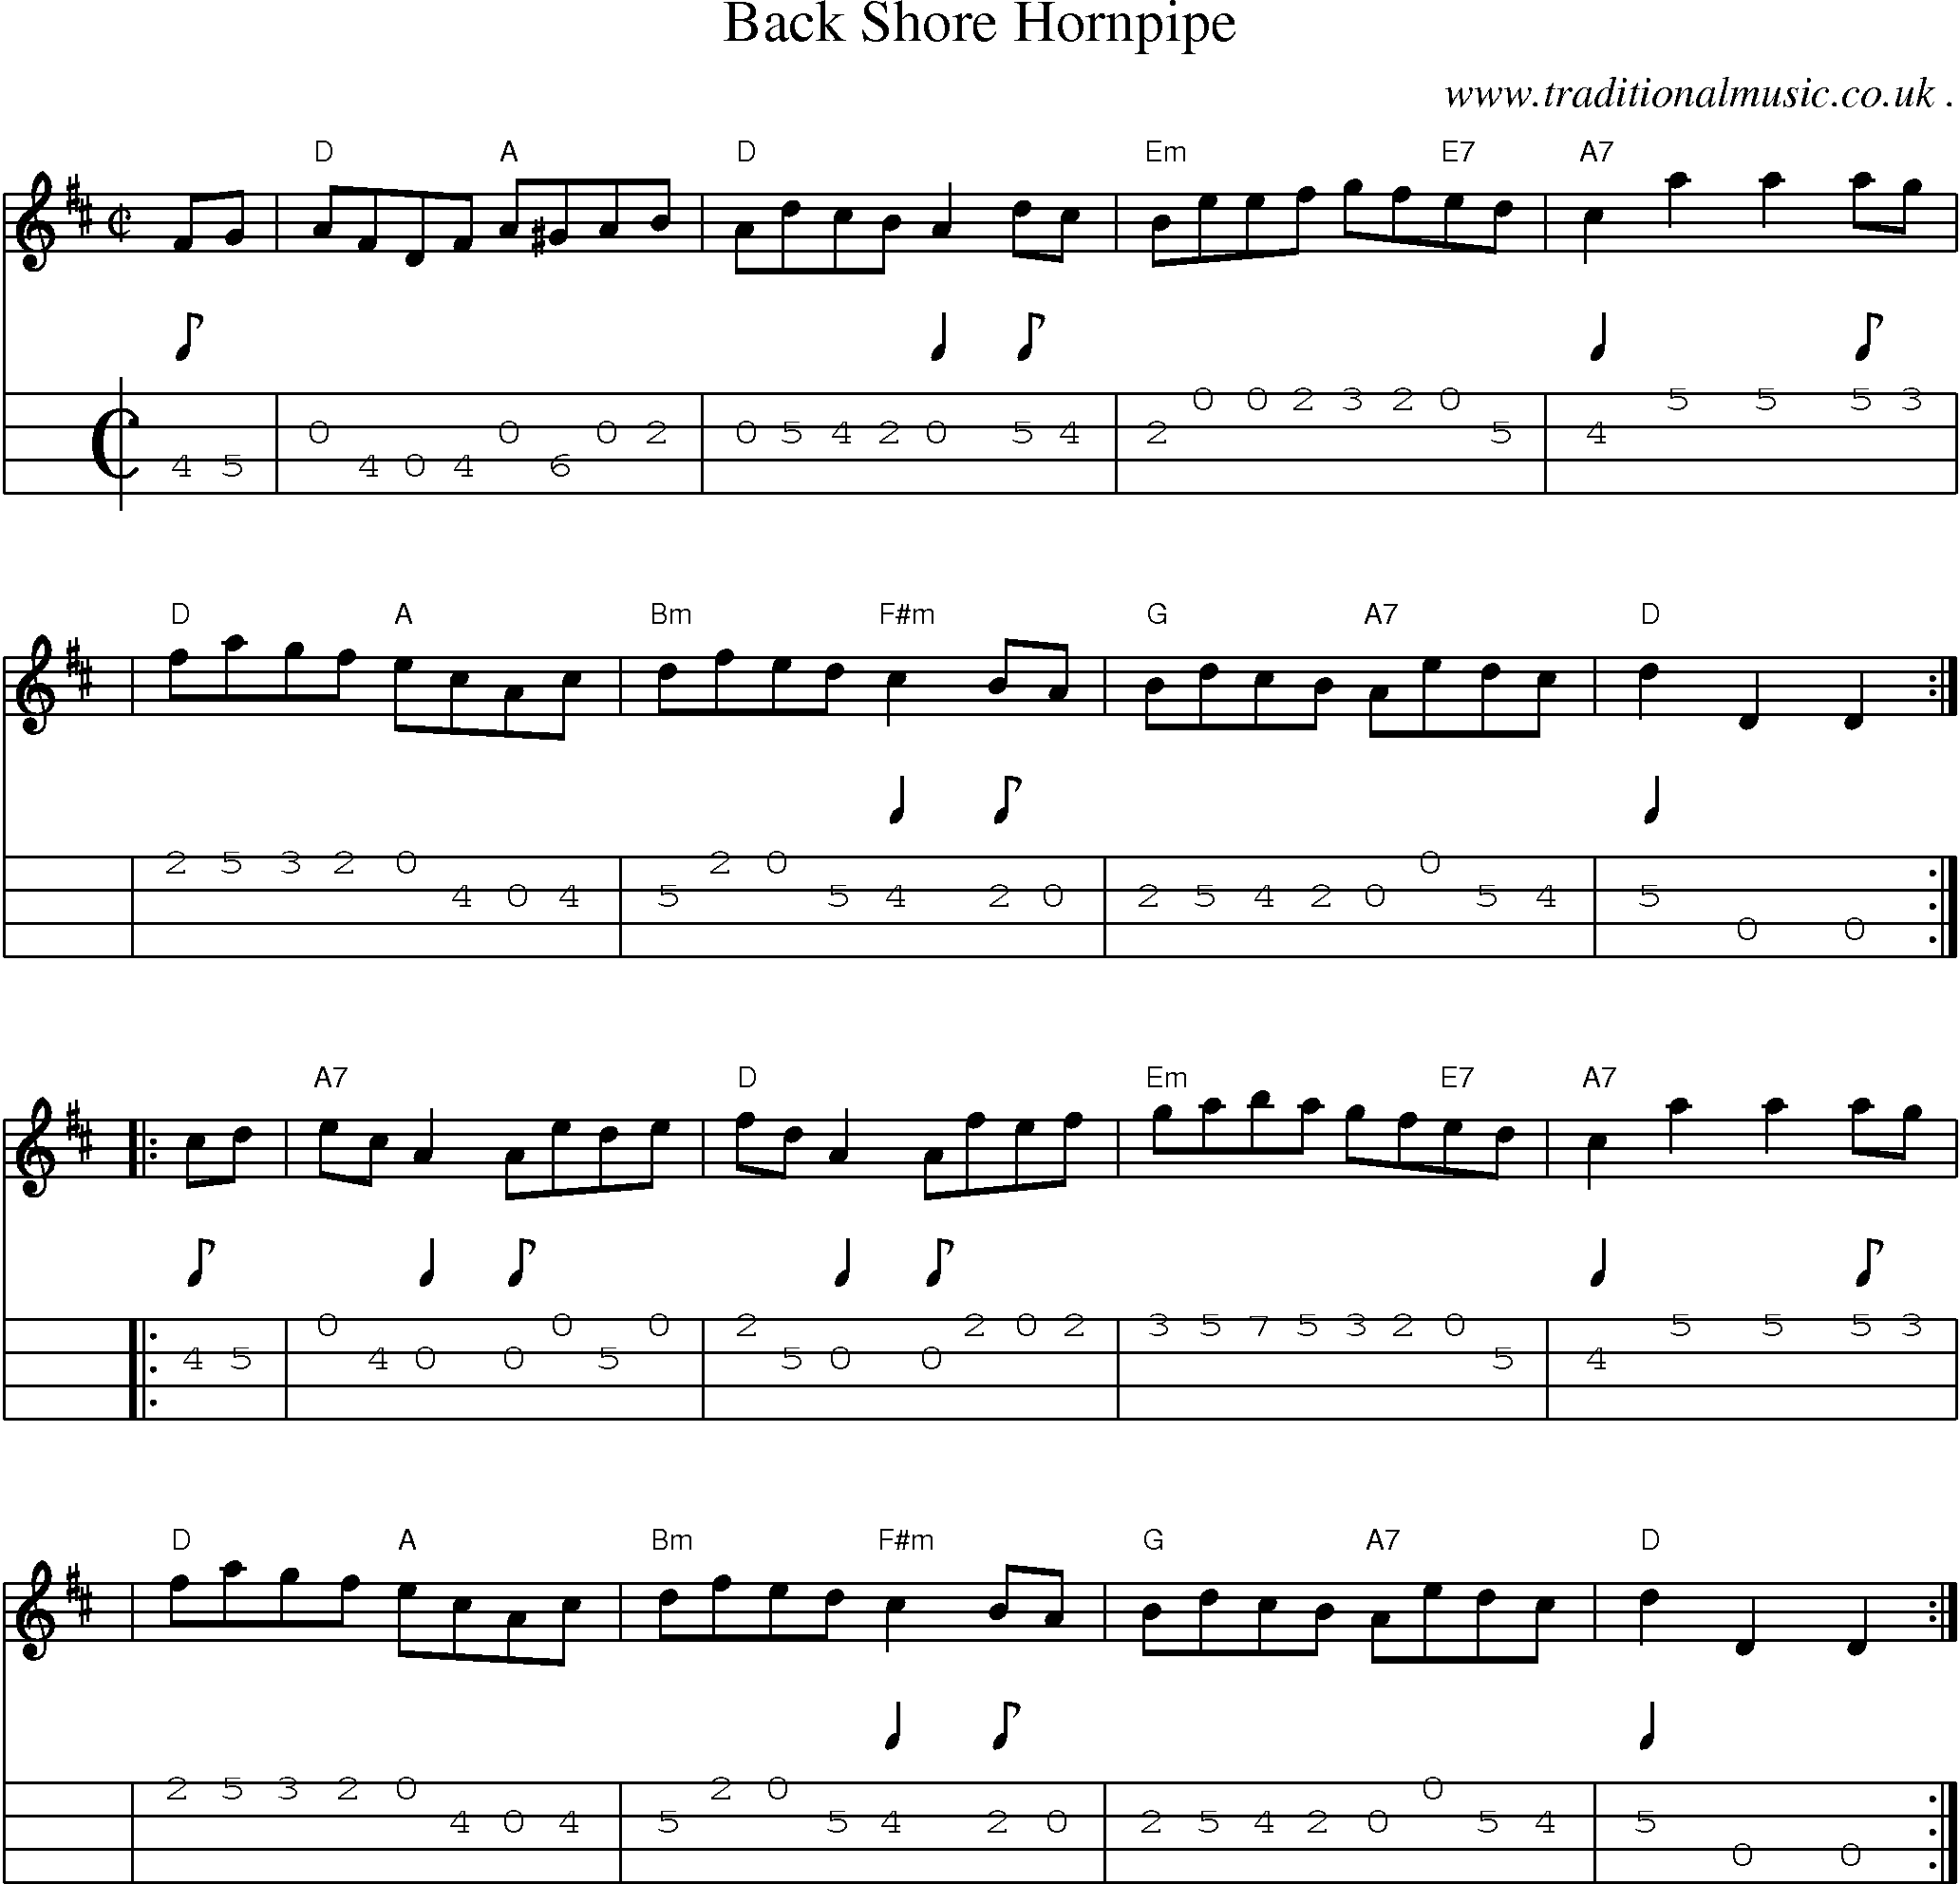 Sheet-music  score, Chords and Mandolin Tabs for Back Shore Hornpipe